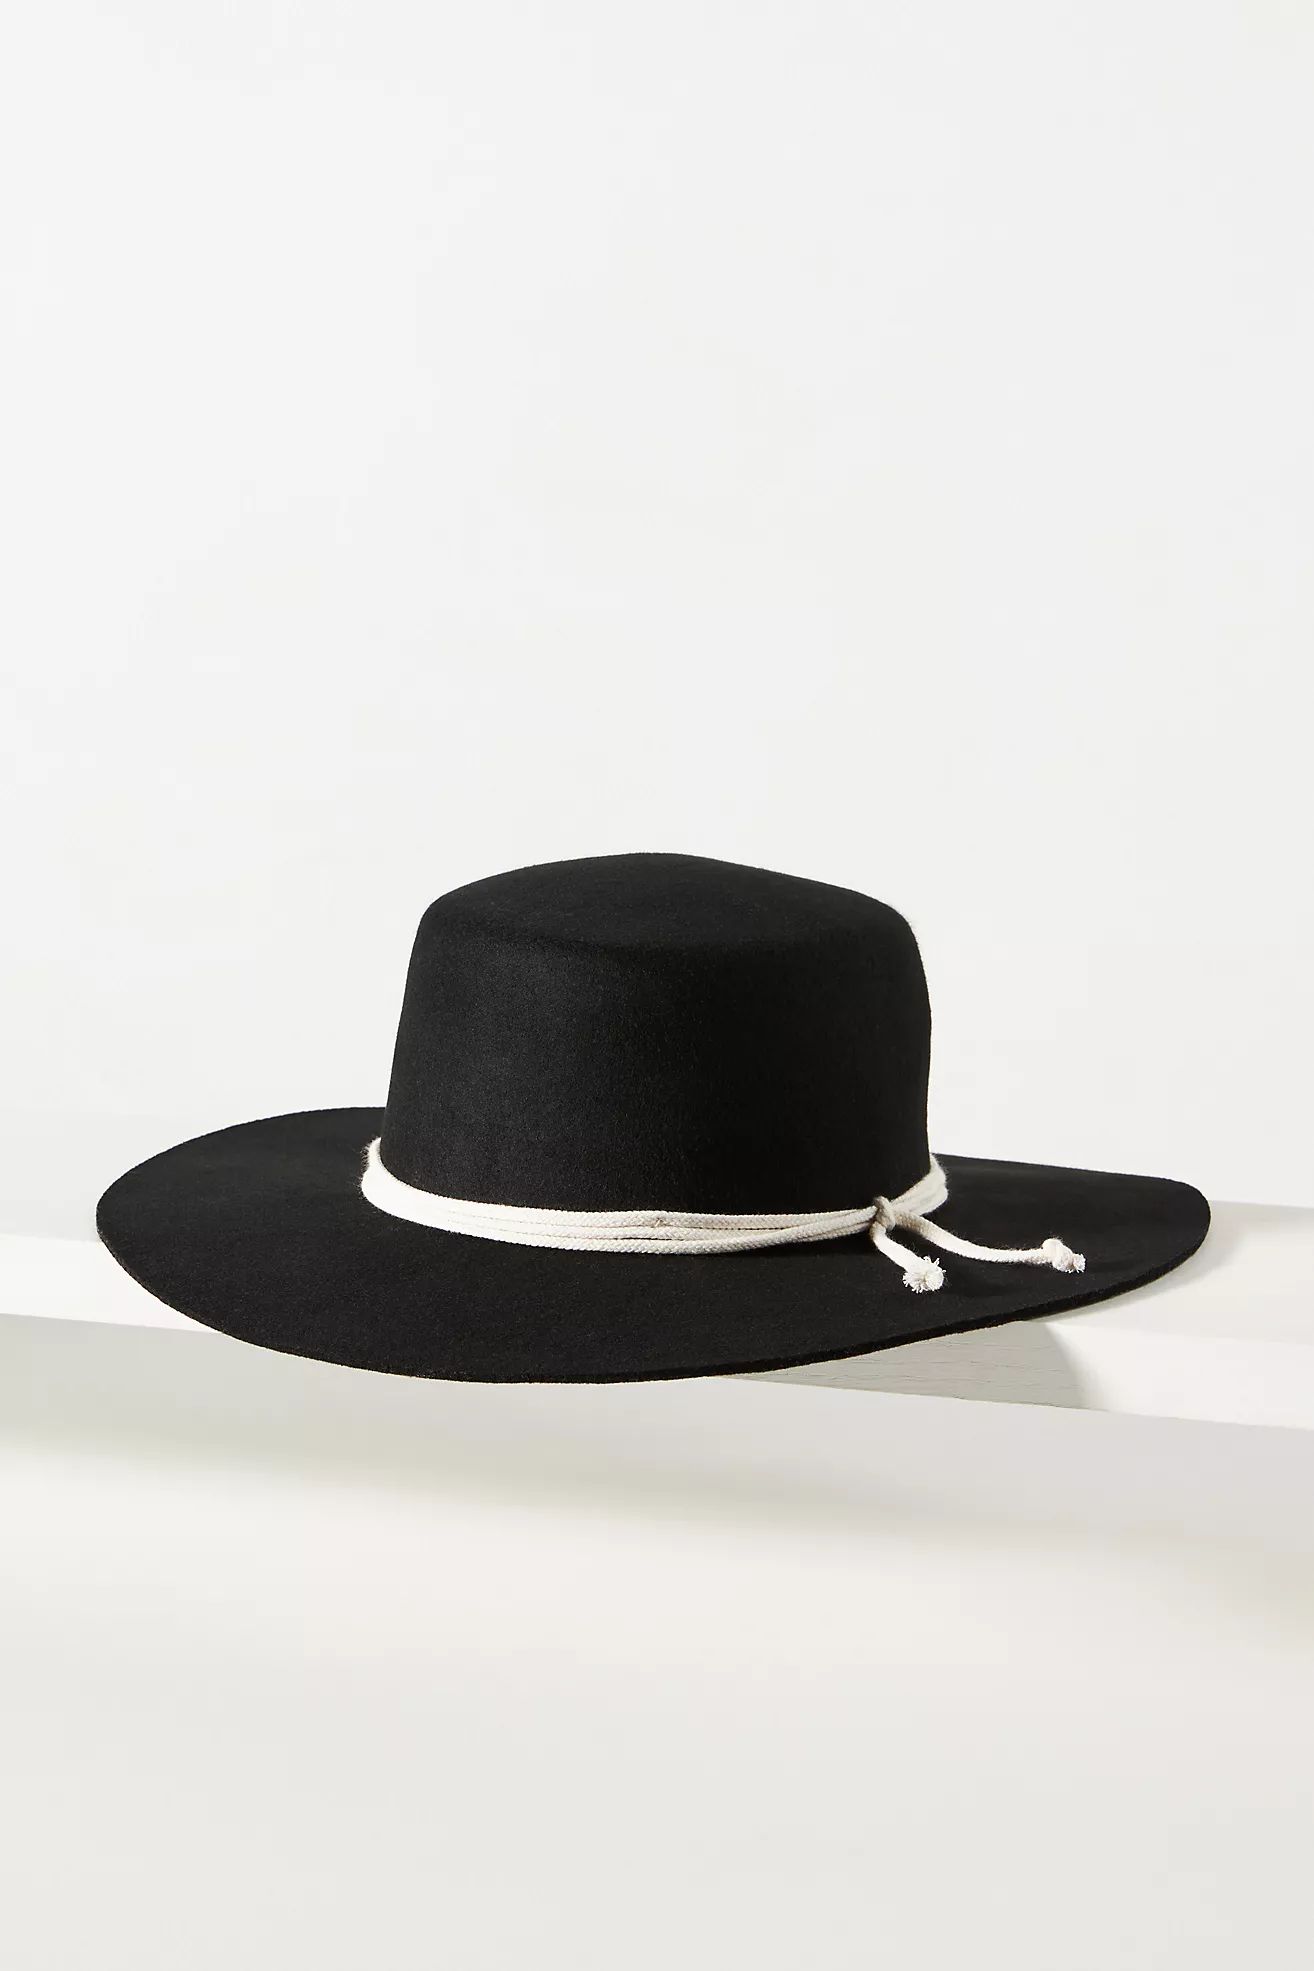 San Diego Hat Co. Rope Rancher | Anthropologie (US)